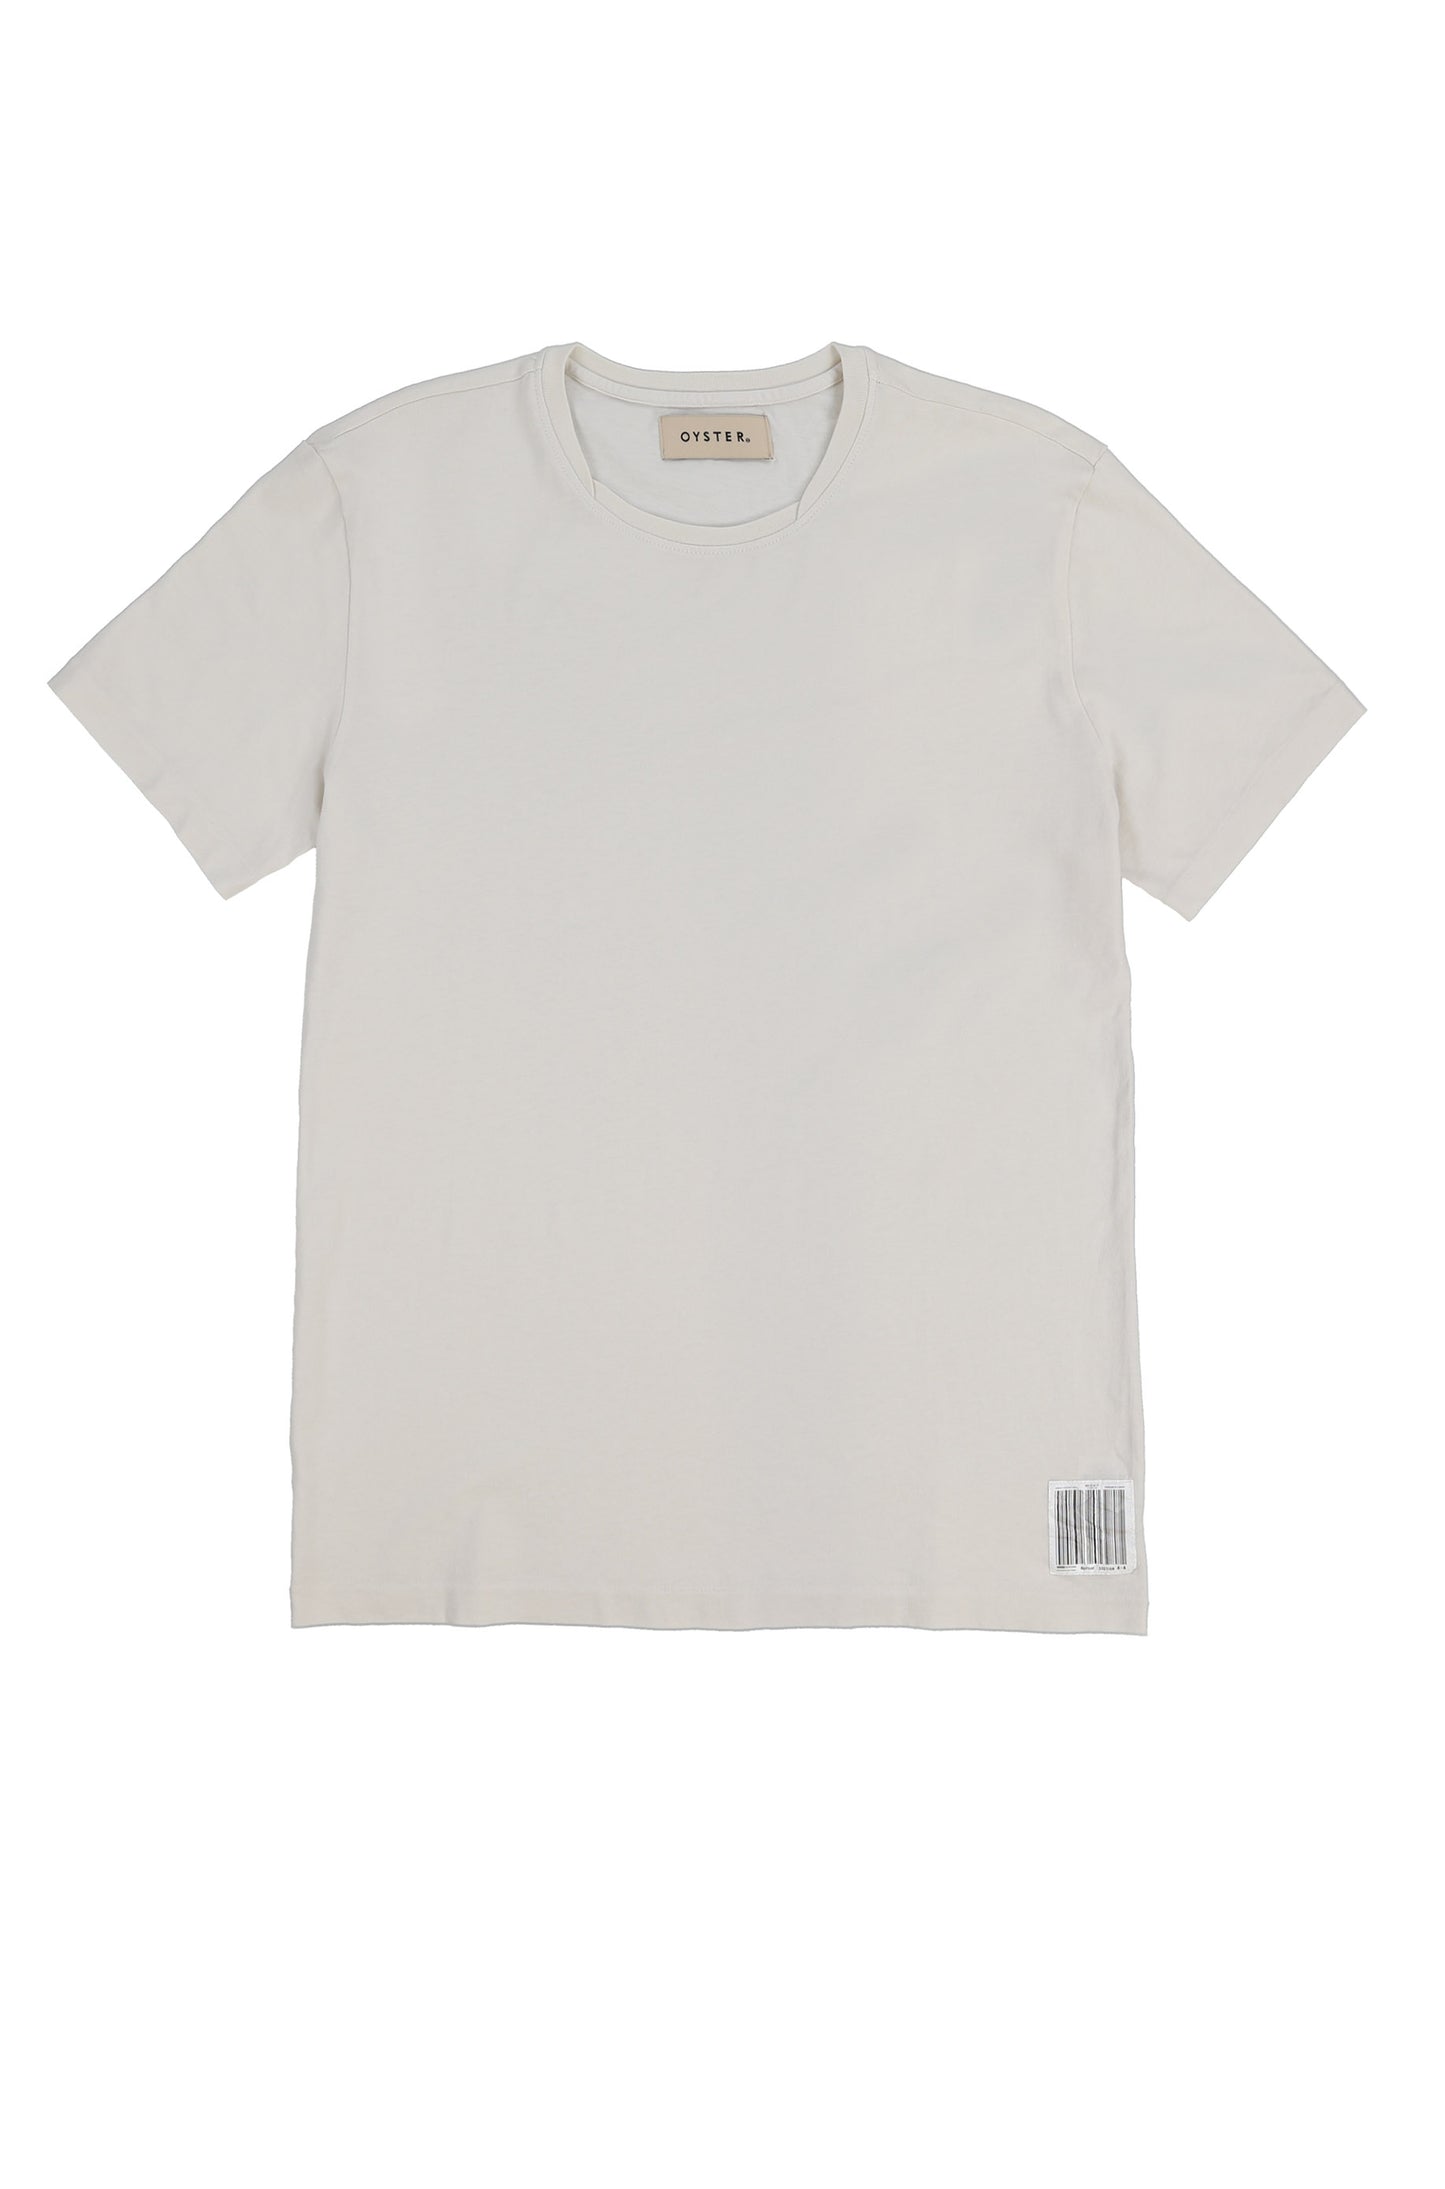 OYSTER NECK LAYERING TEE (VINTAGE WHITE)